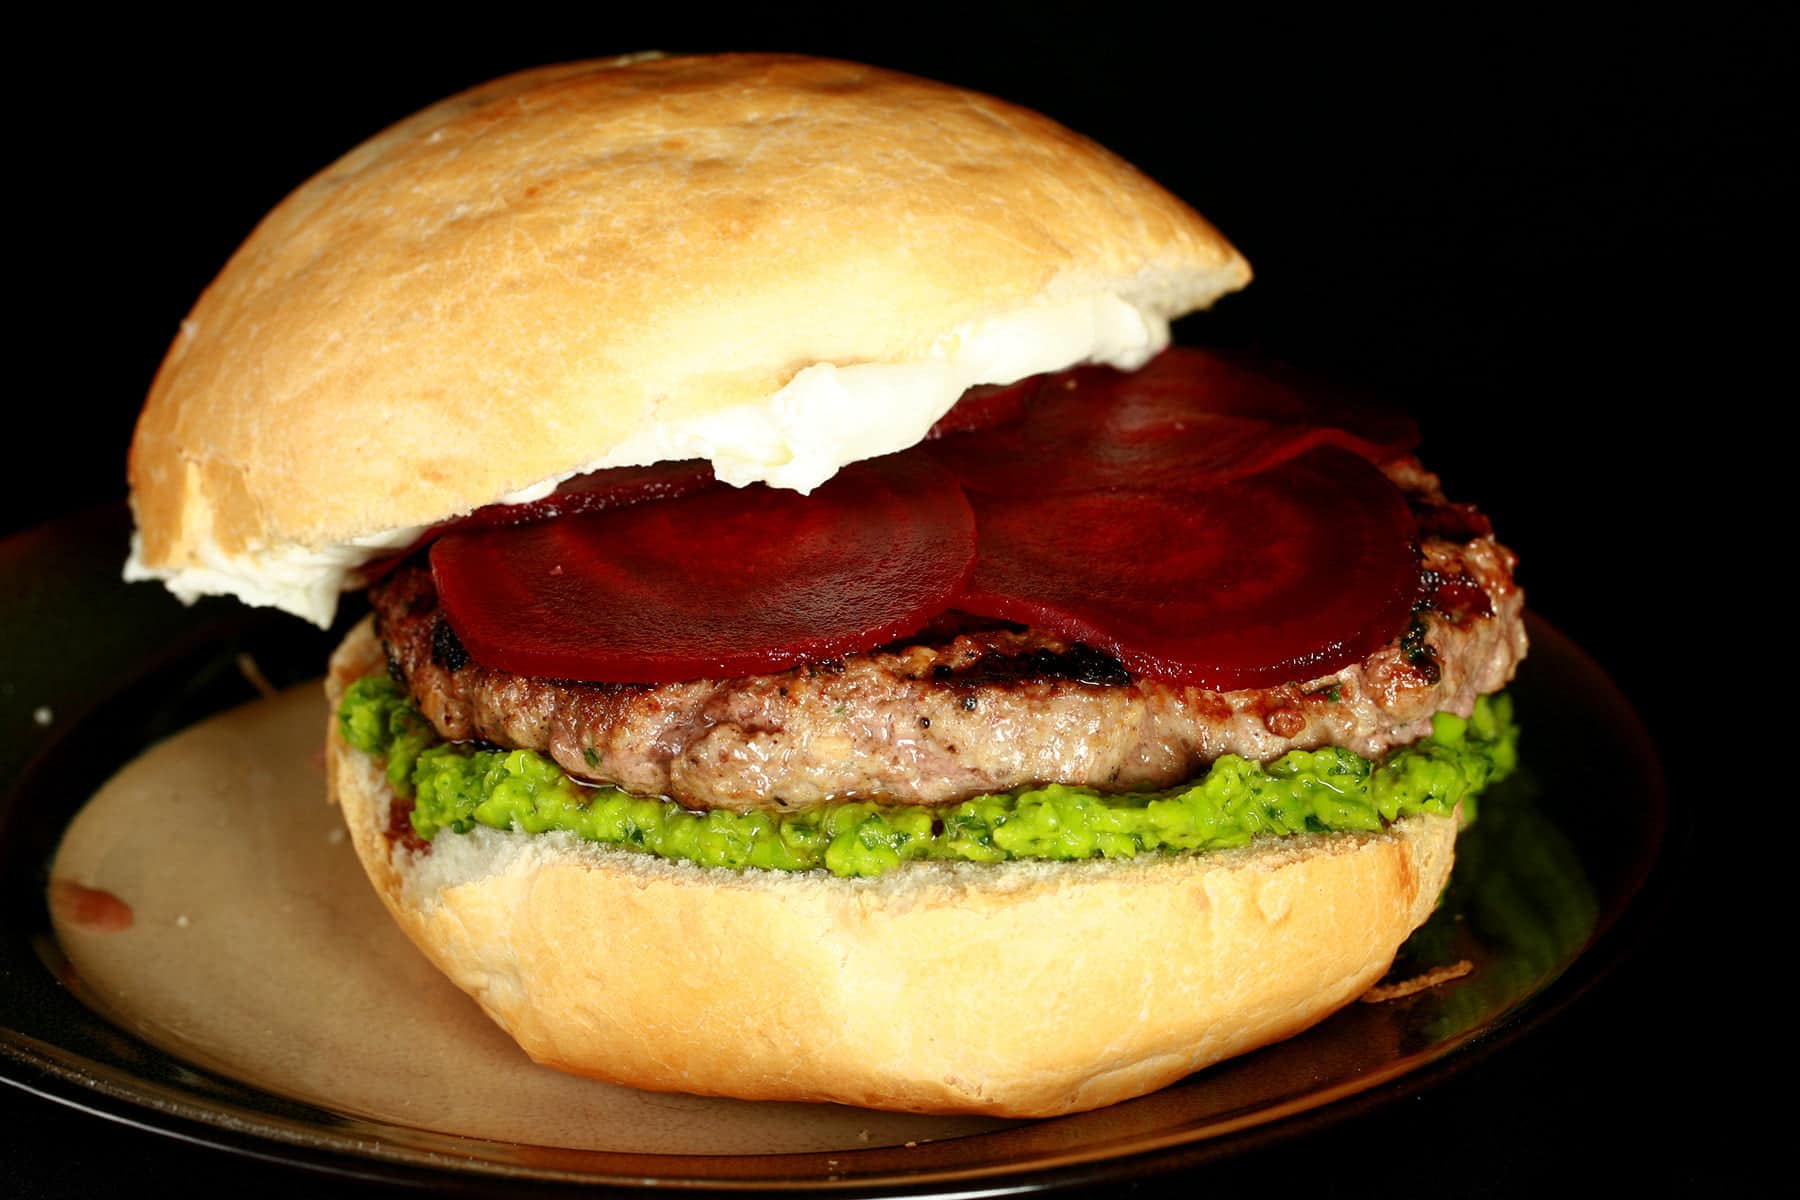 Close up view of a moroccan spiced lamb burger with a green spread, a goat cheese spread, and beet slices on it.